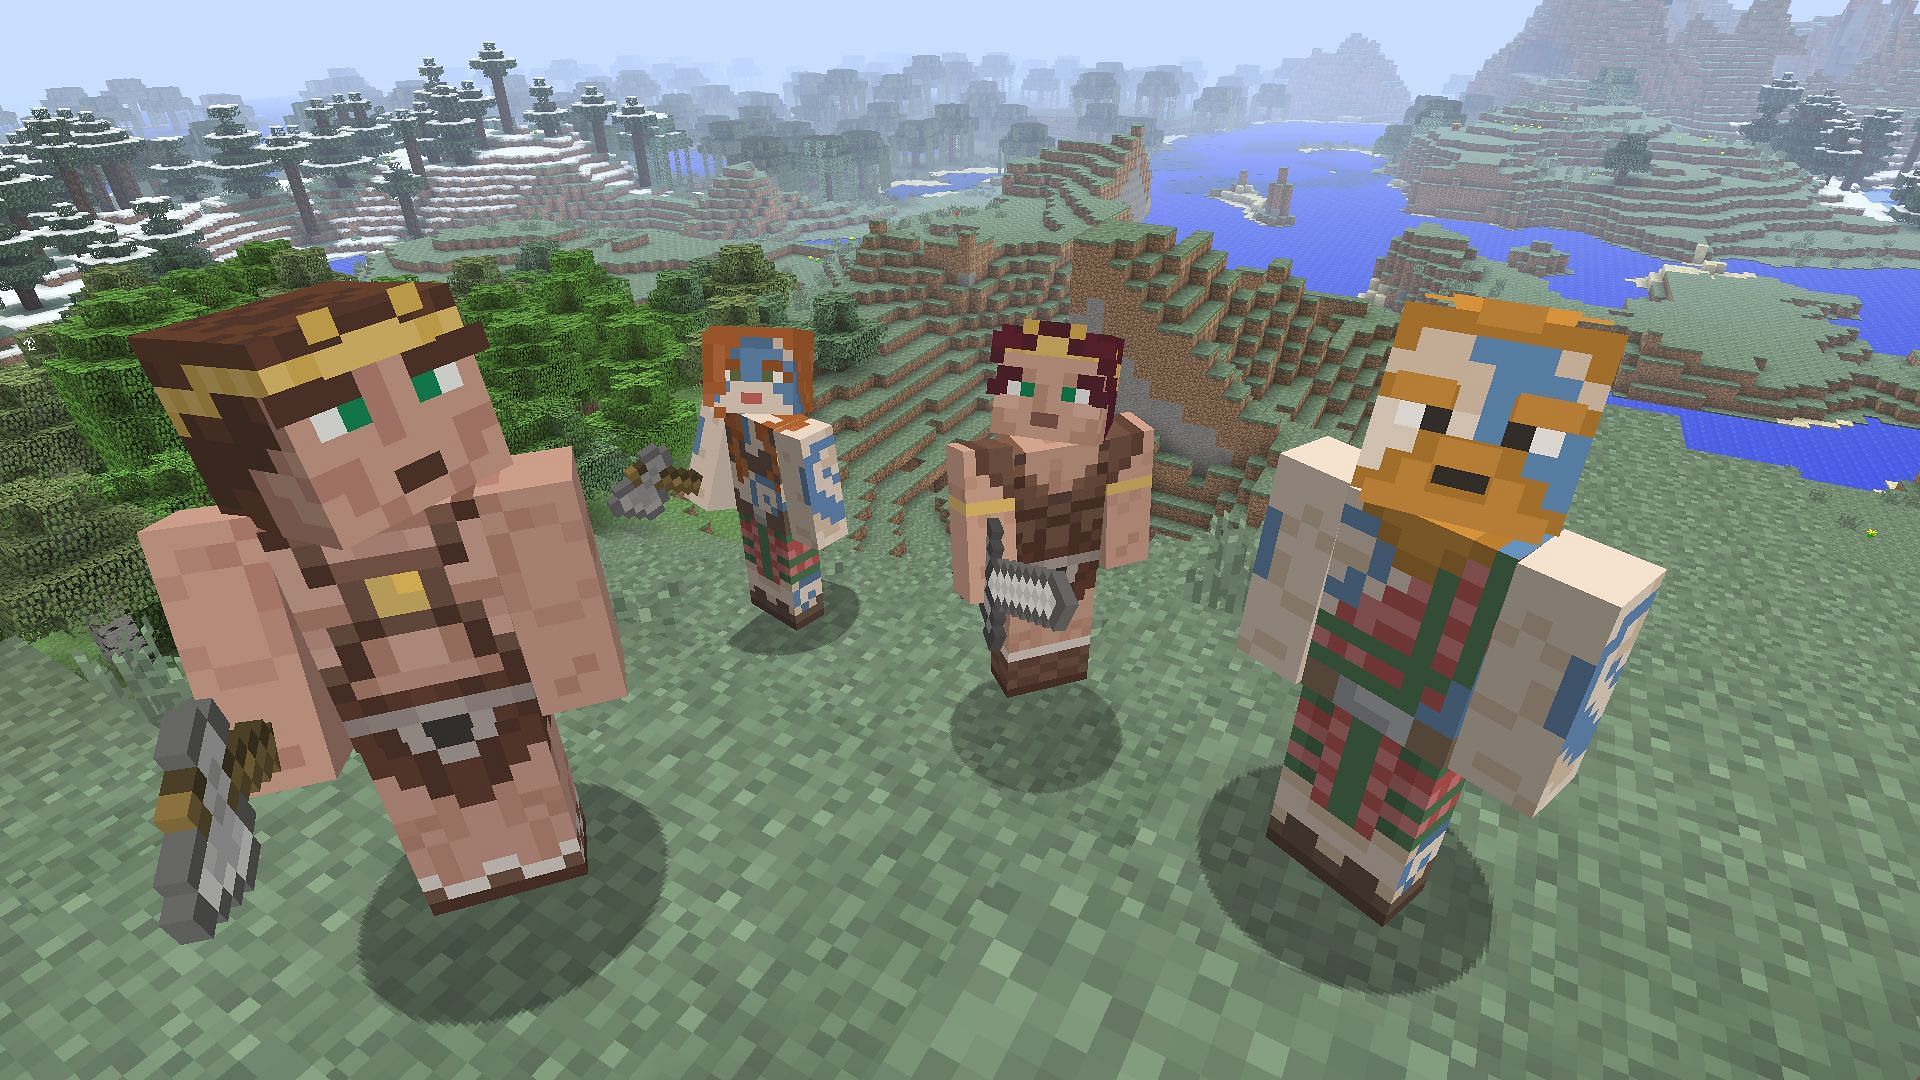 Barbarian-styled characters in Minecraft ready to PvP.